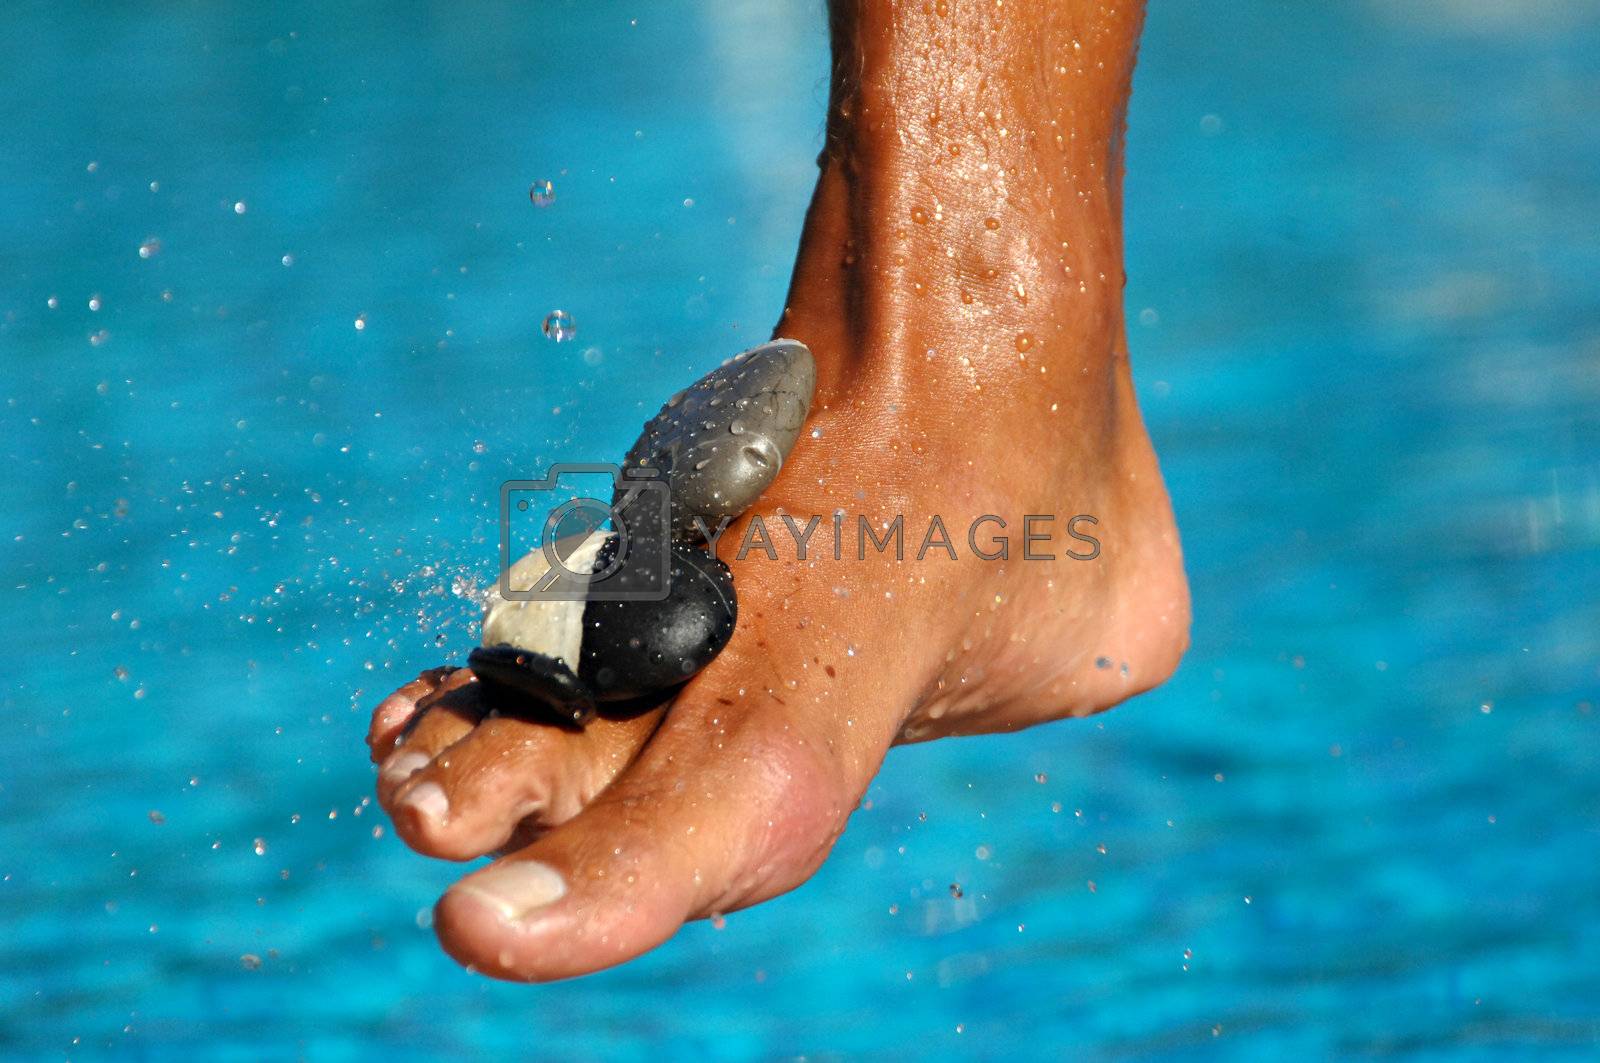 Royalty free image of Zen by swimnews